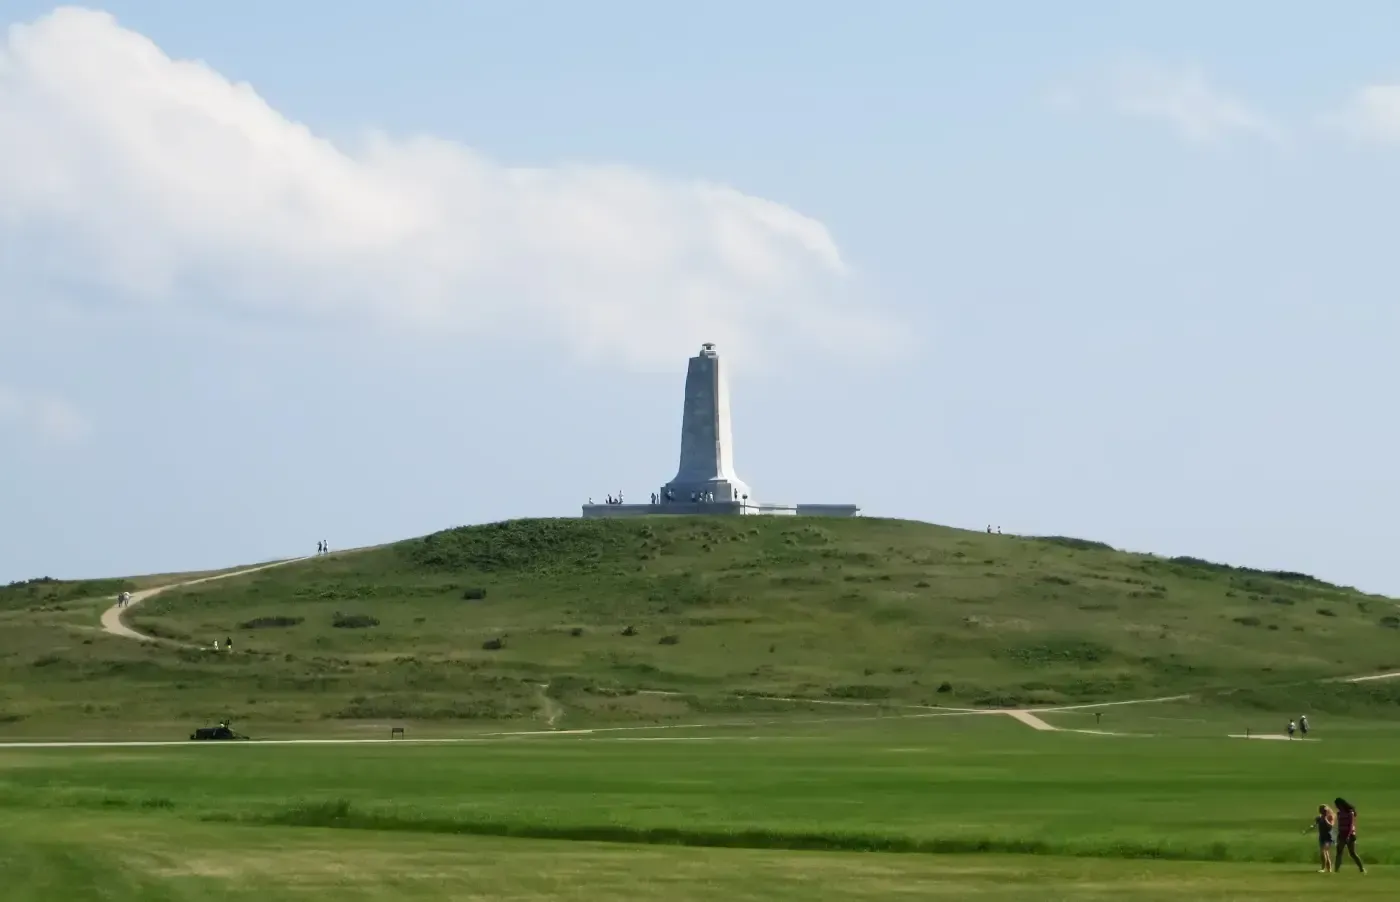 The monument at the location of the Wright brothers' first flight.